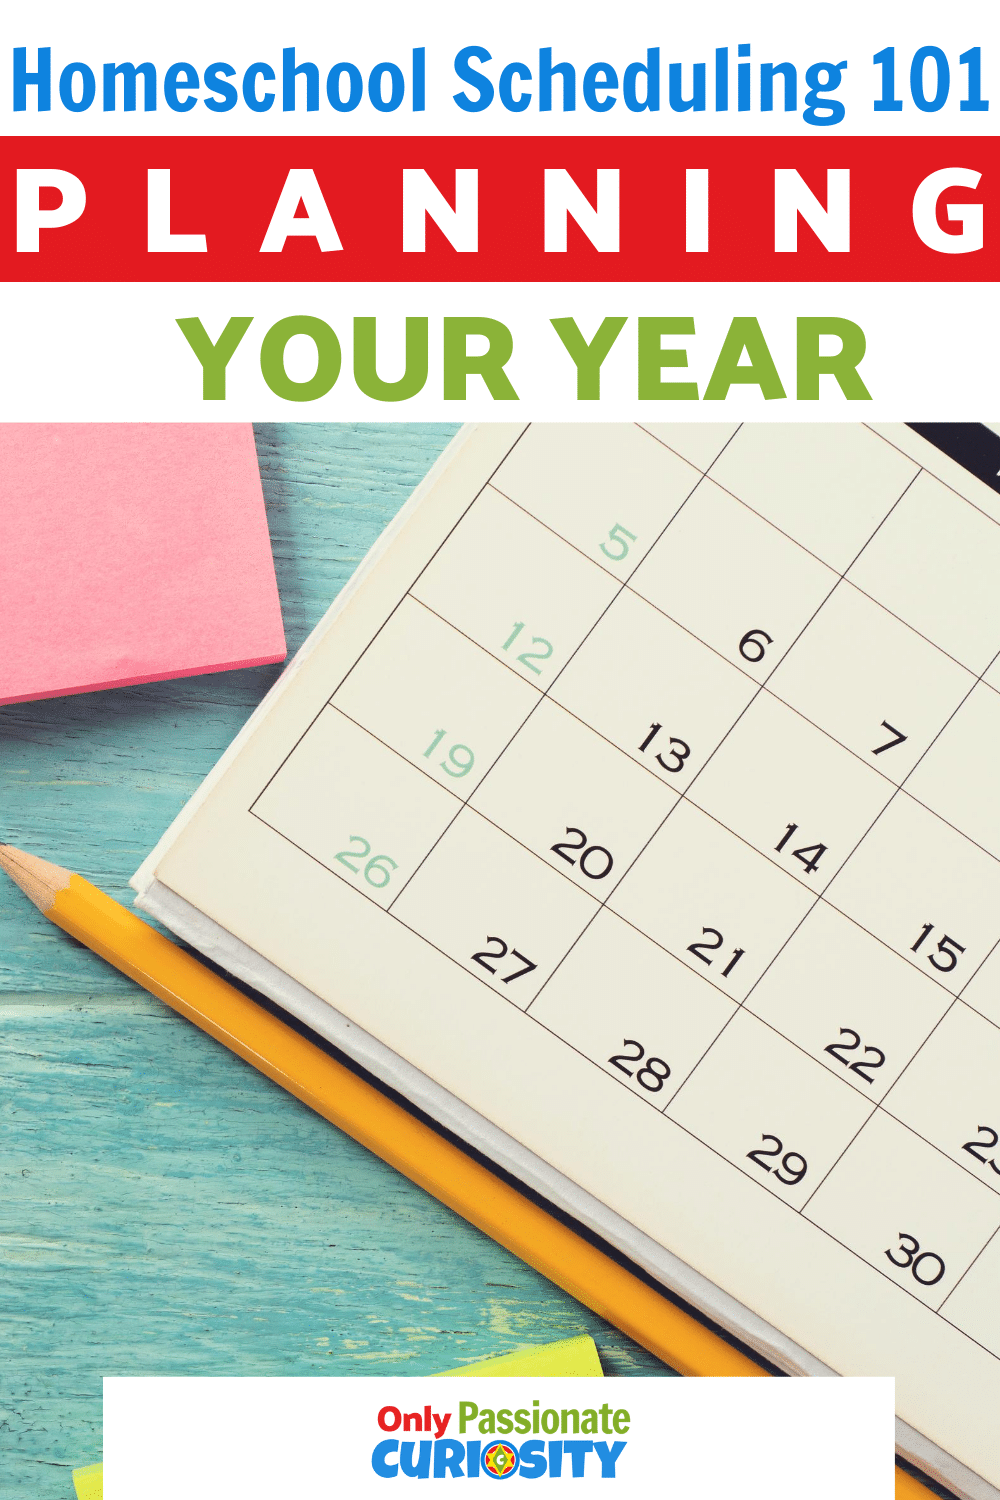 Homeschool Scheduling 101, is designed to help you get your scheduling done quickly and efficiently--so you can plan your year ahead. #Homeschool #Timemanagement #Planning